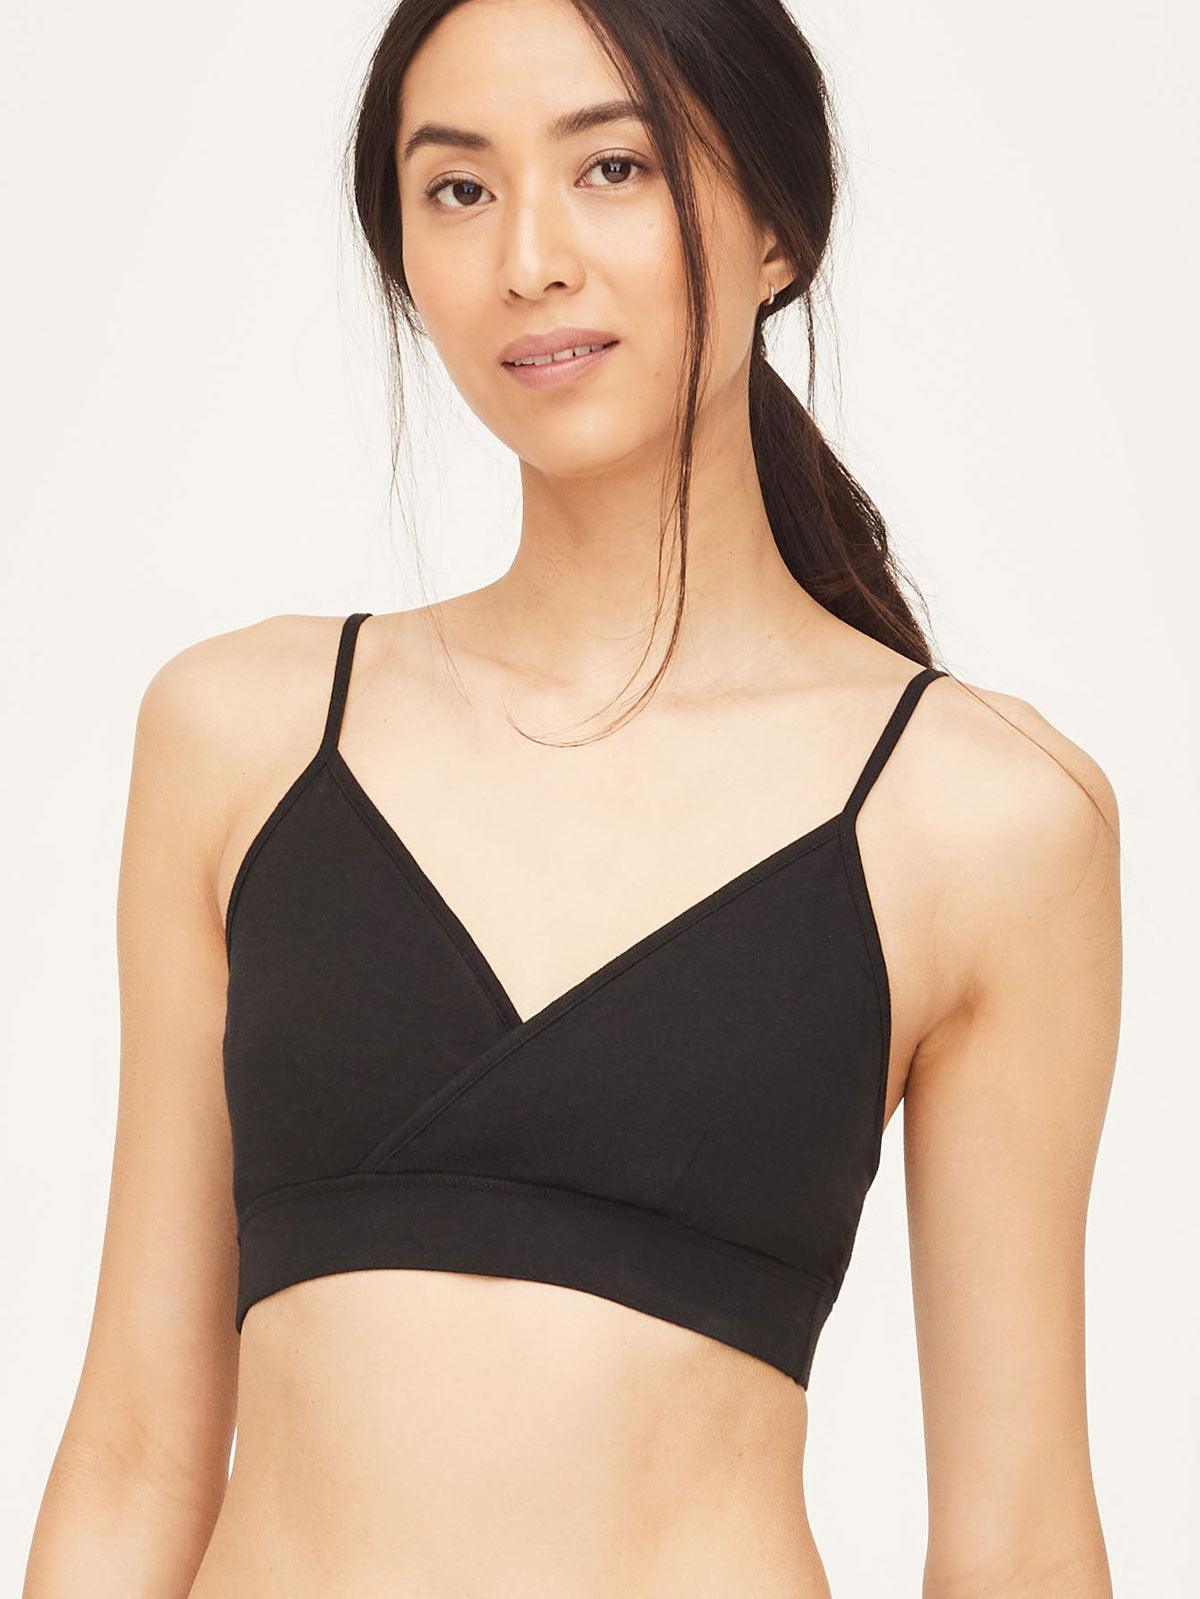 Black Organic Jersey Bralette With Sheer Mesh Details See Through